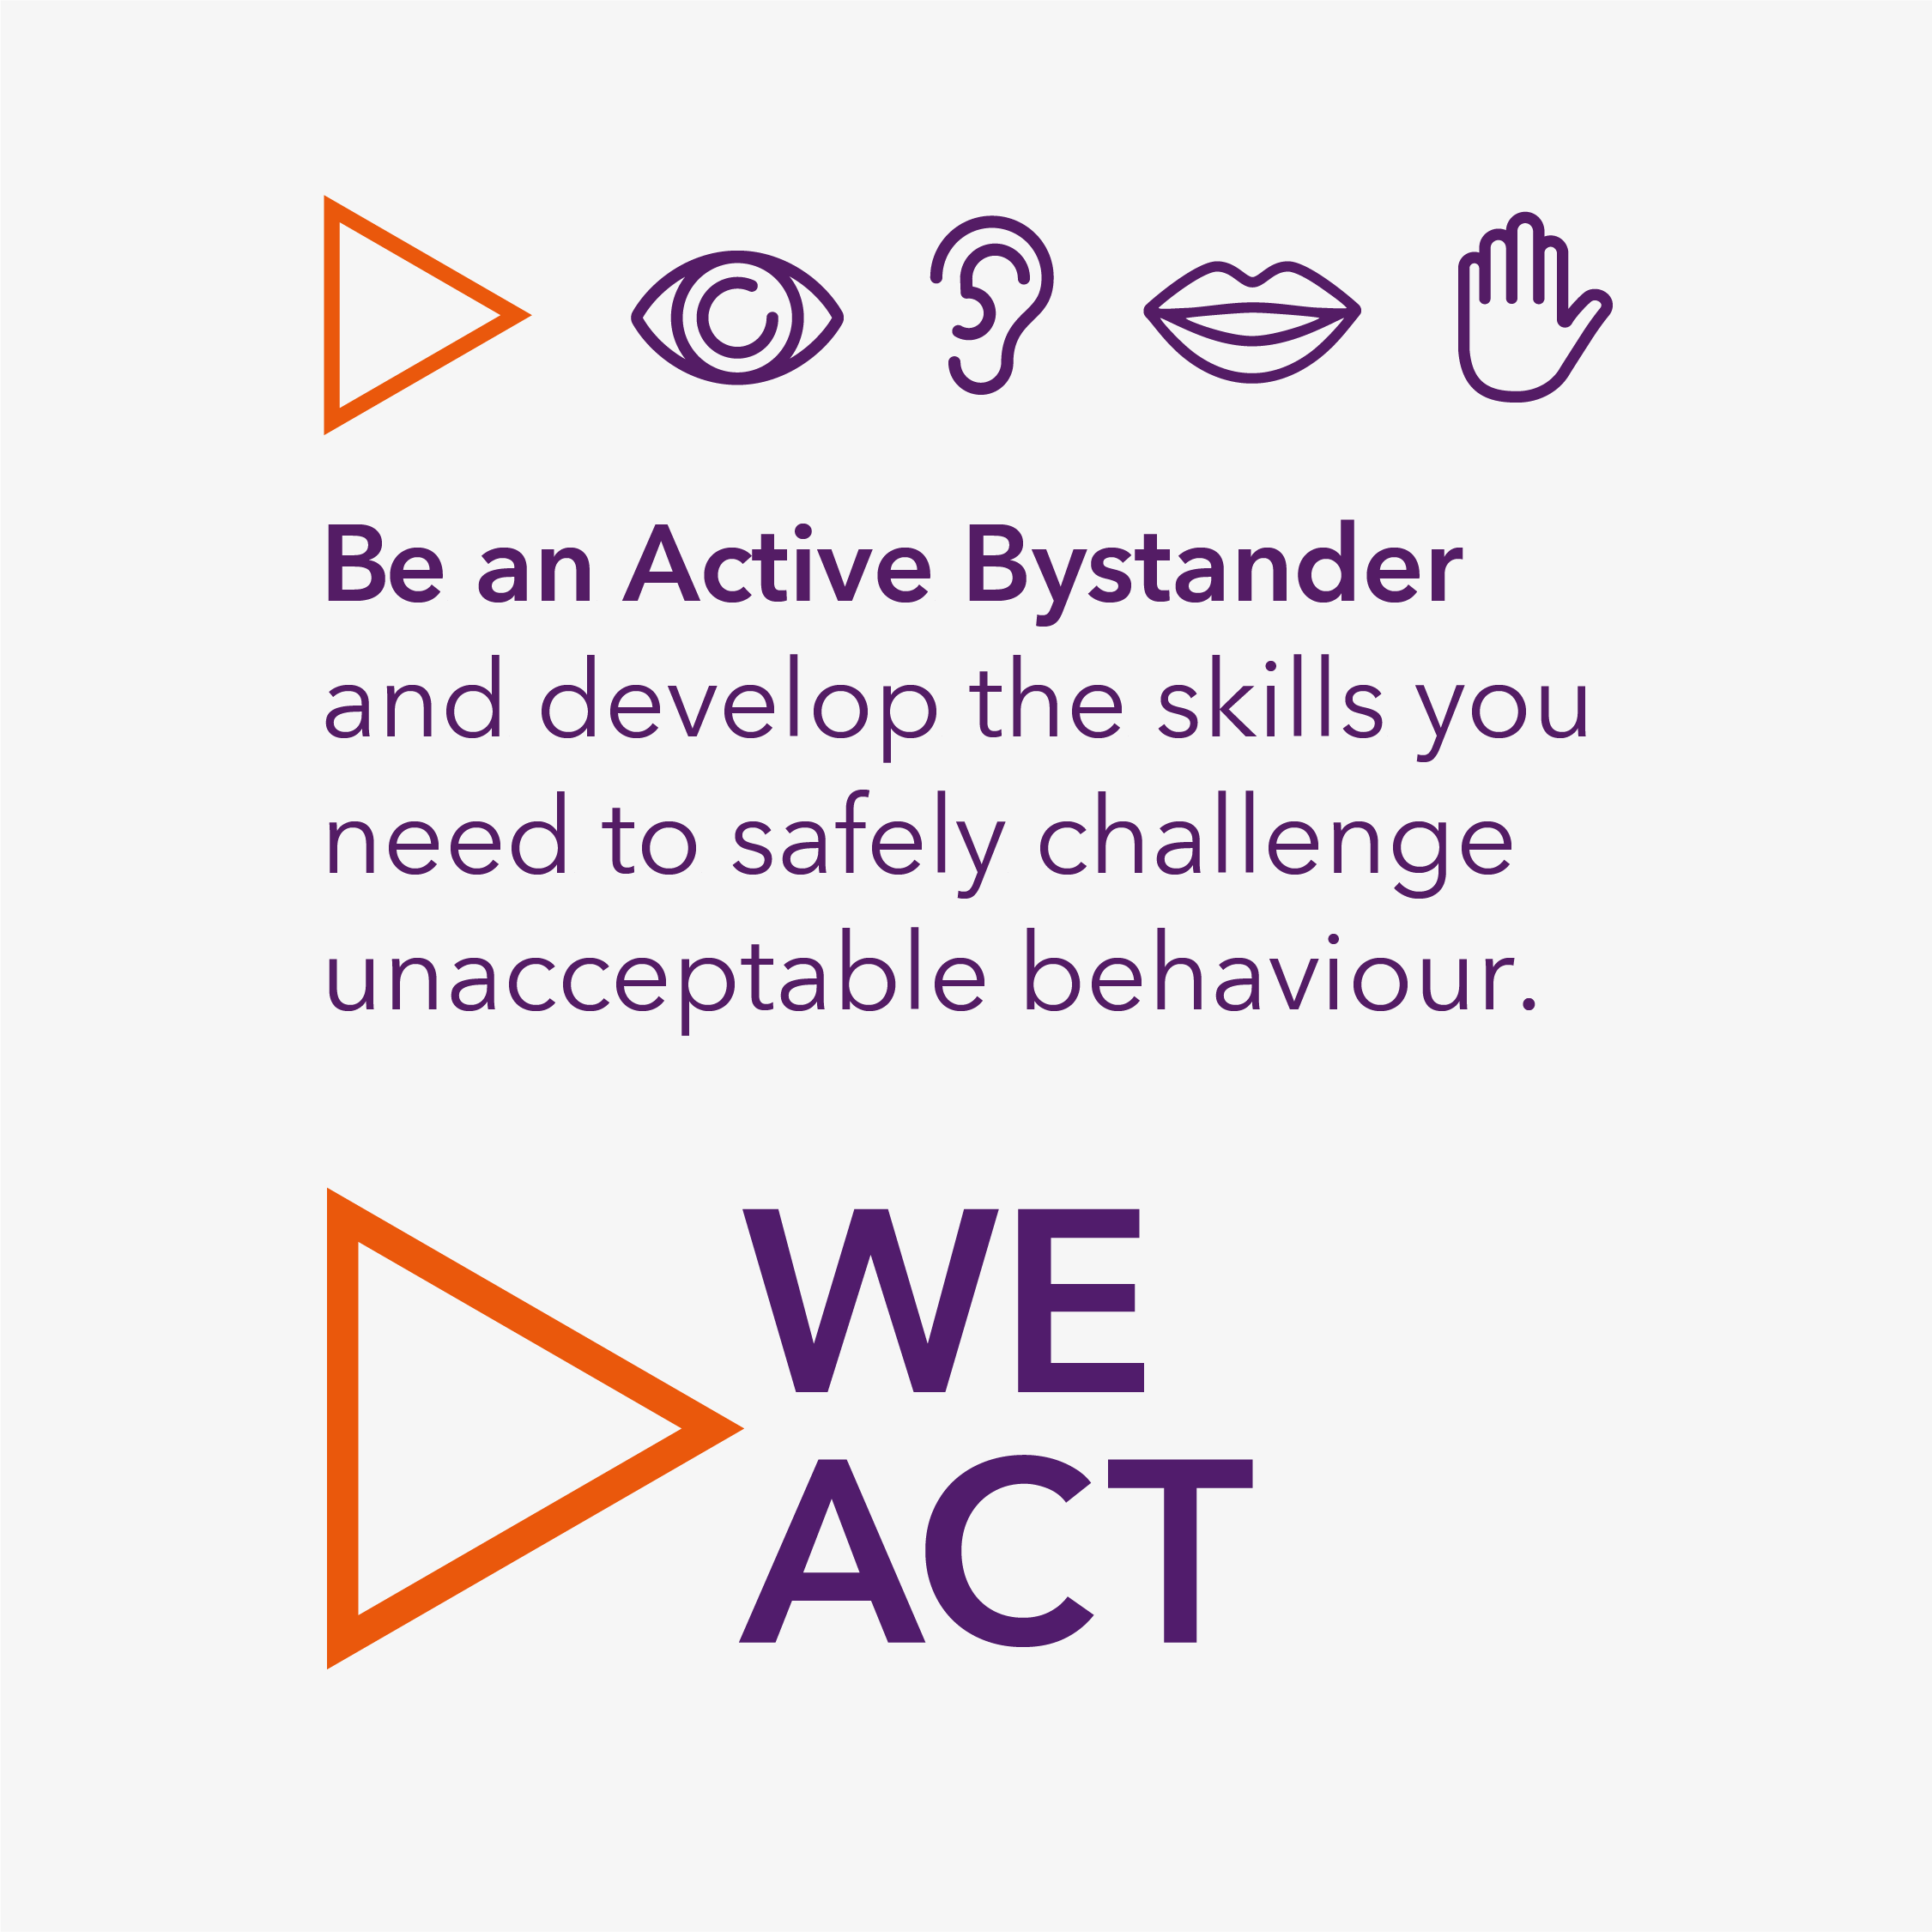 We ACT logo and poster - 'Be an Active Bystander'